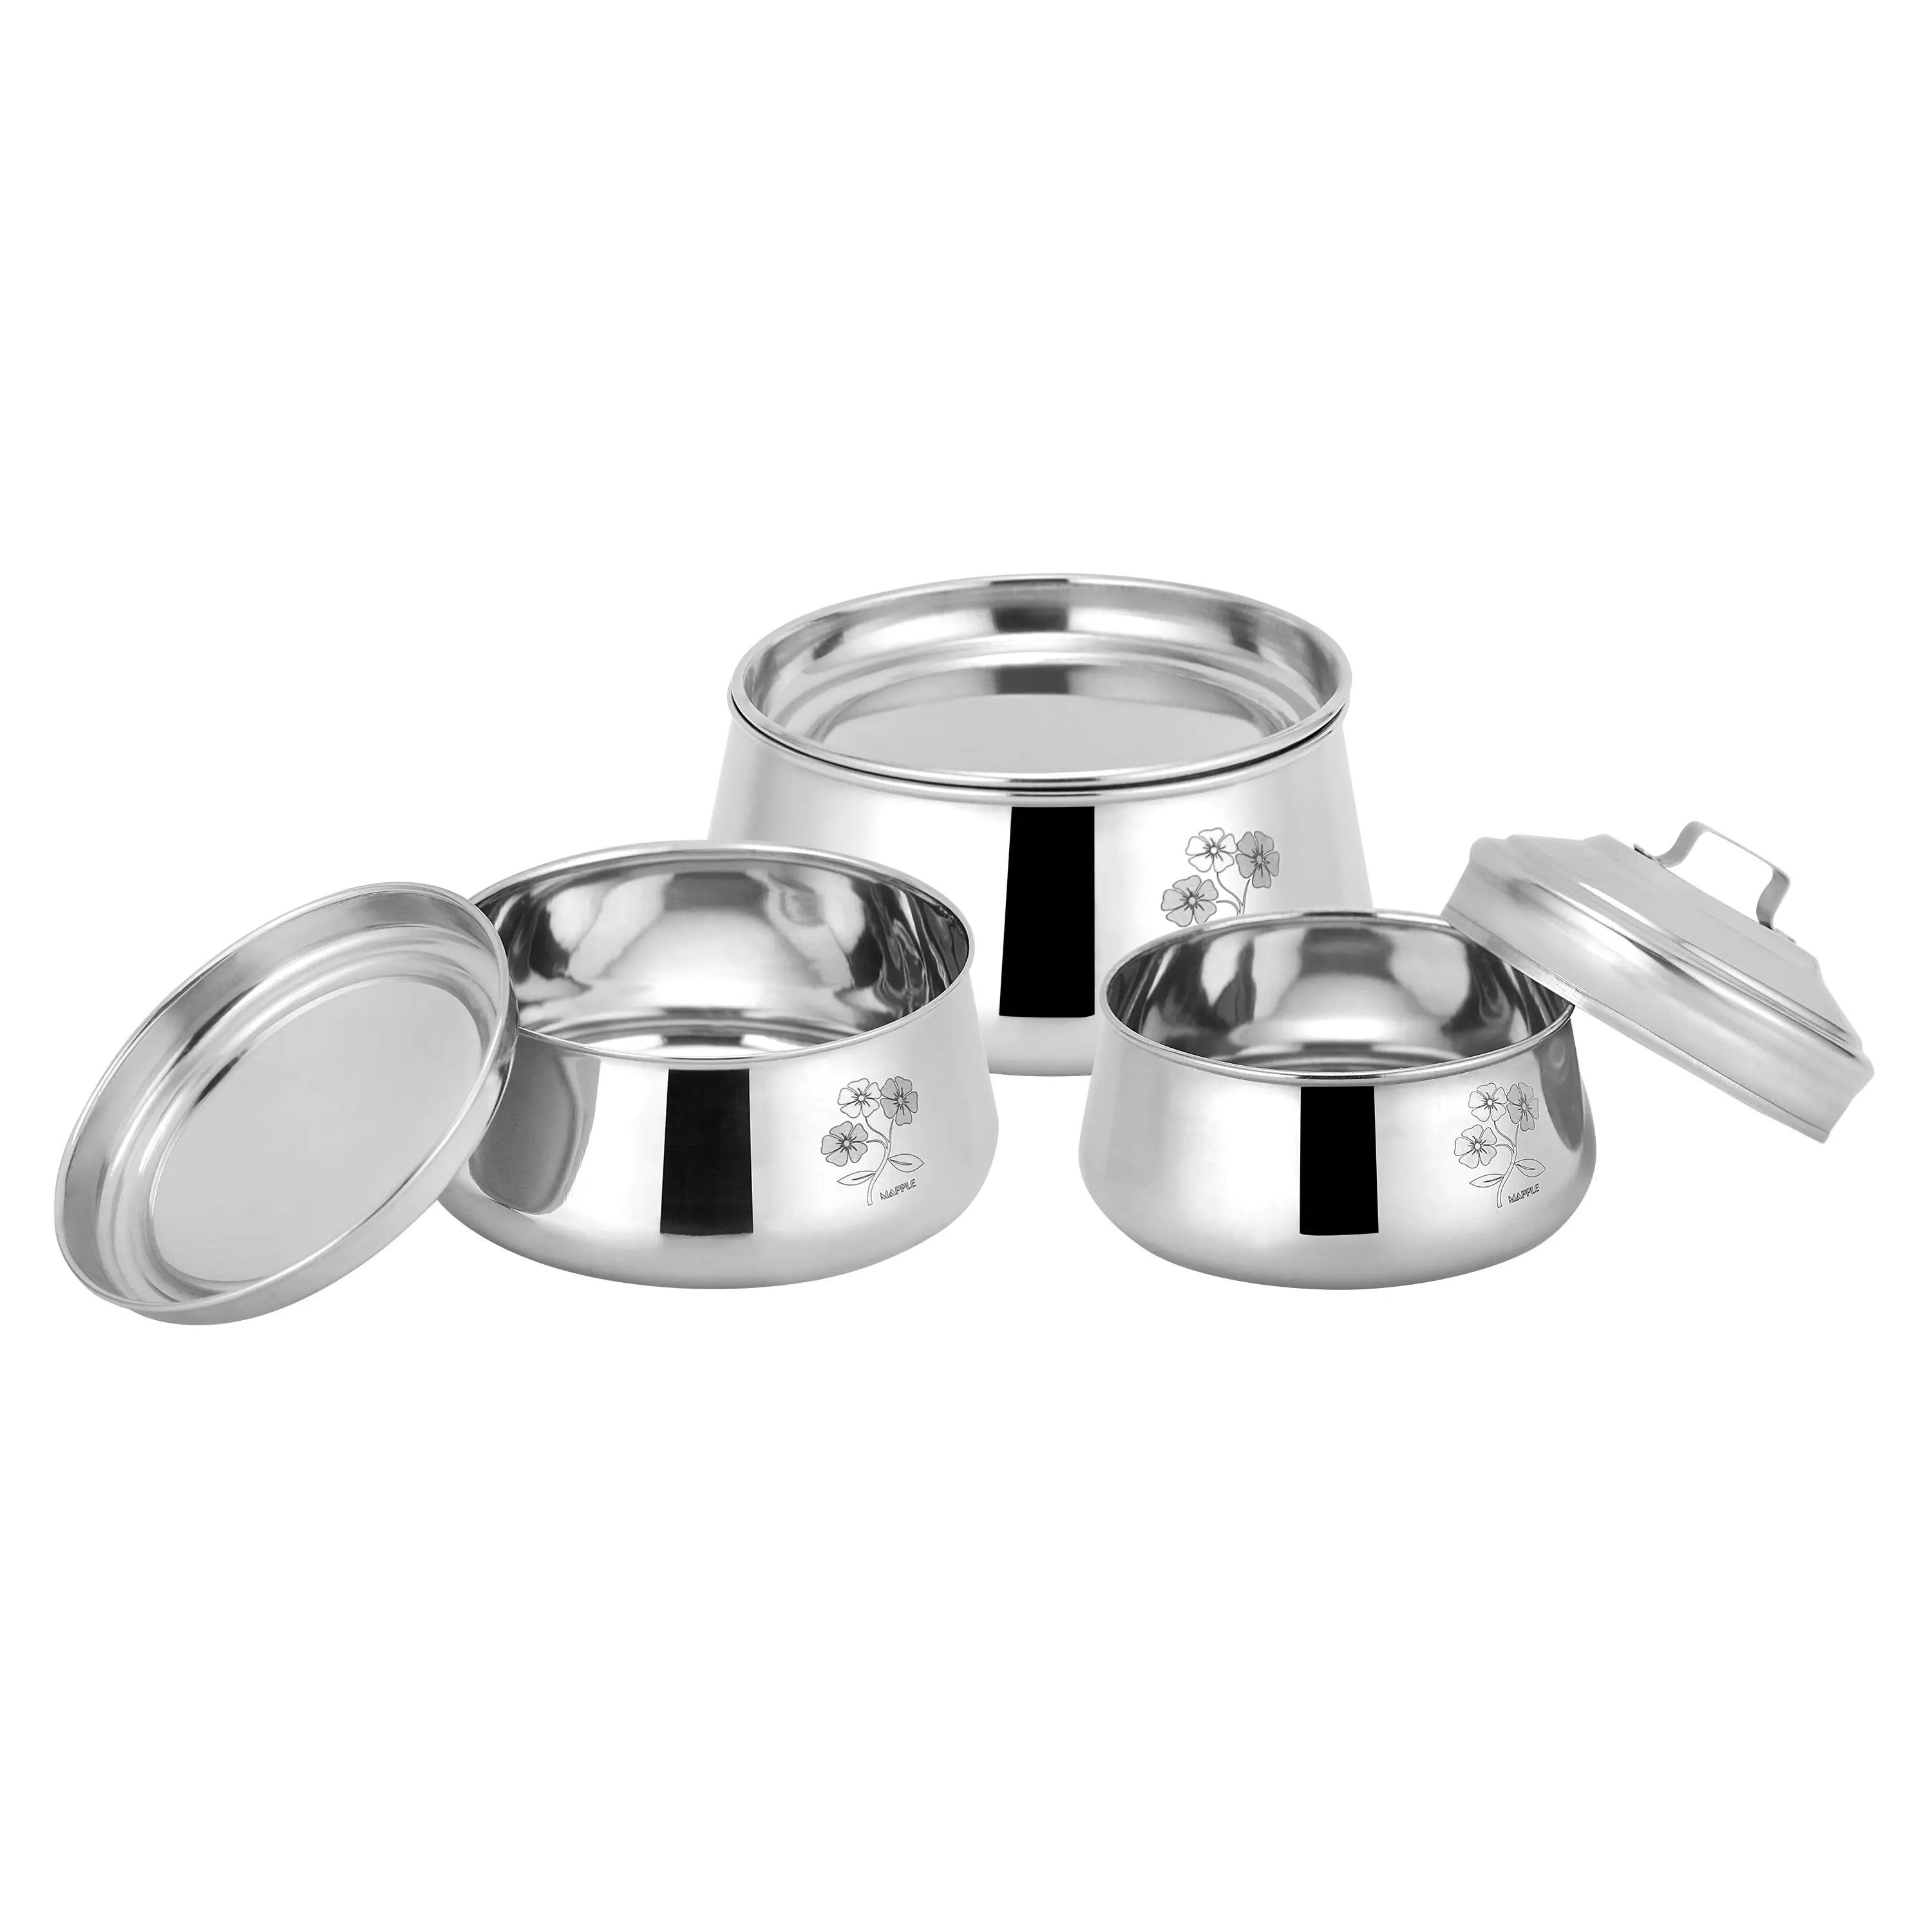 STAINLESS STEEL PYRAMID TIFFIN - CROCKERY WALA AND COMPANY 